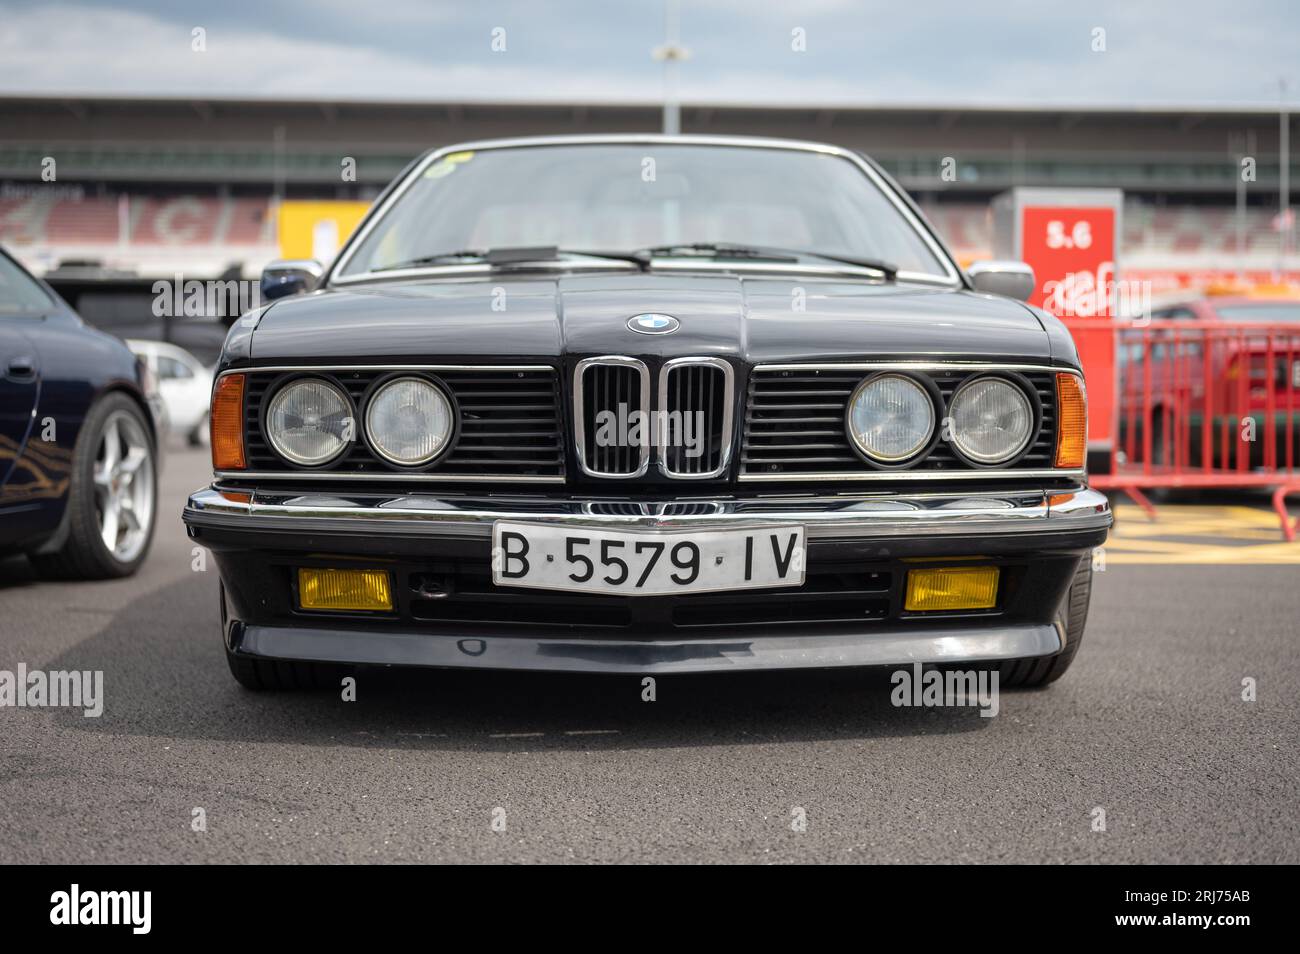 Front view of a high-end classic BMW E24 6 series Stock Photo